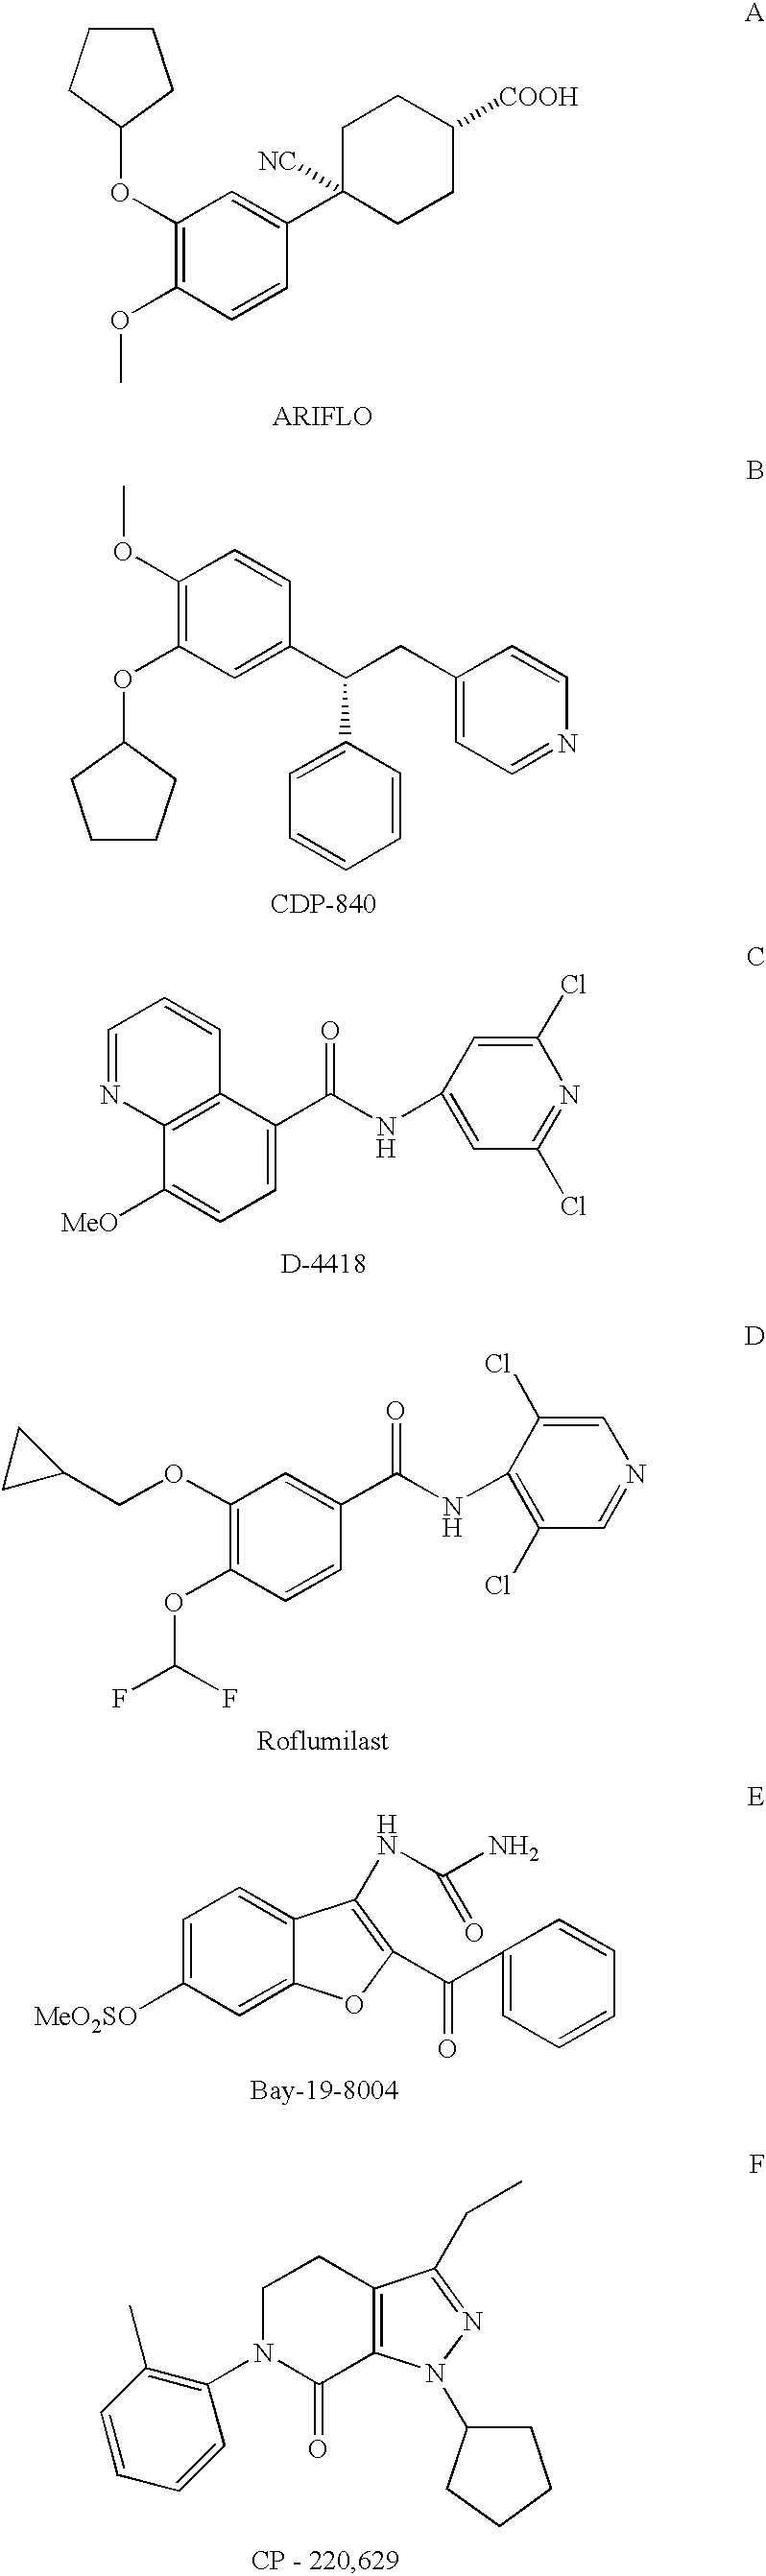 Substituted benzo[4,5]furo[3,2-c]pyridine derivatives as PDE 4 inhibitors